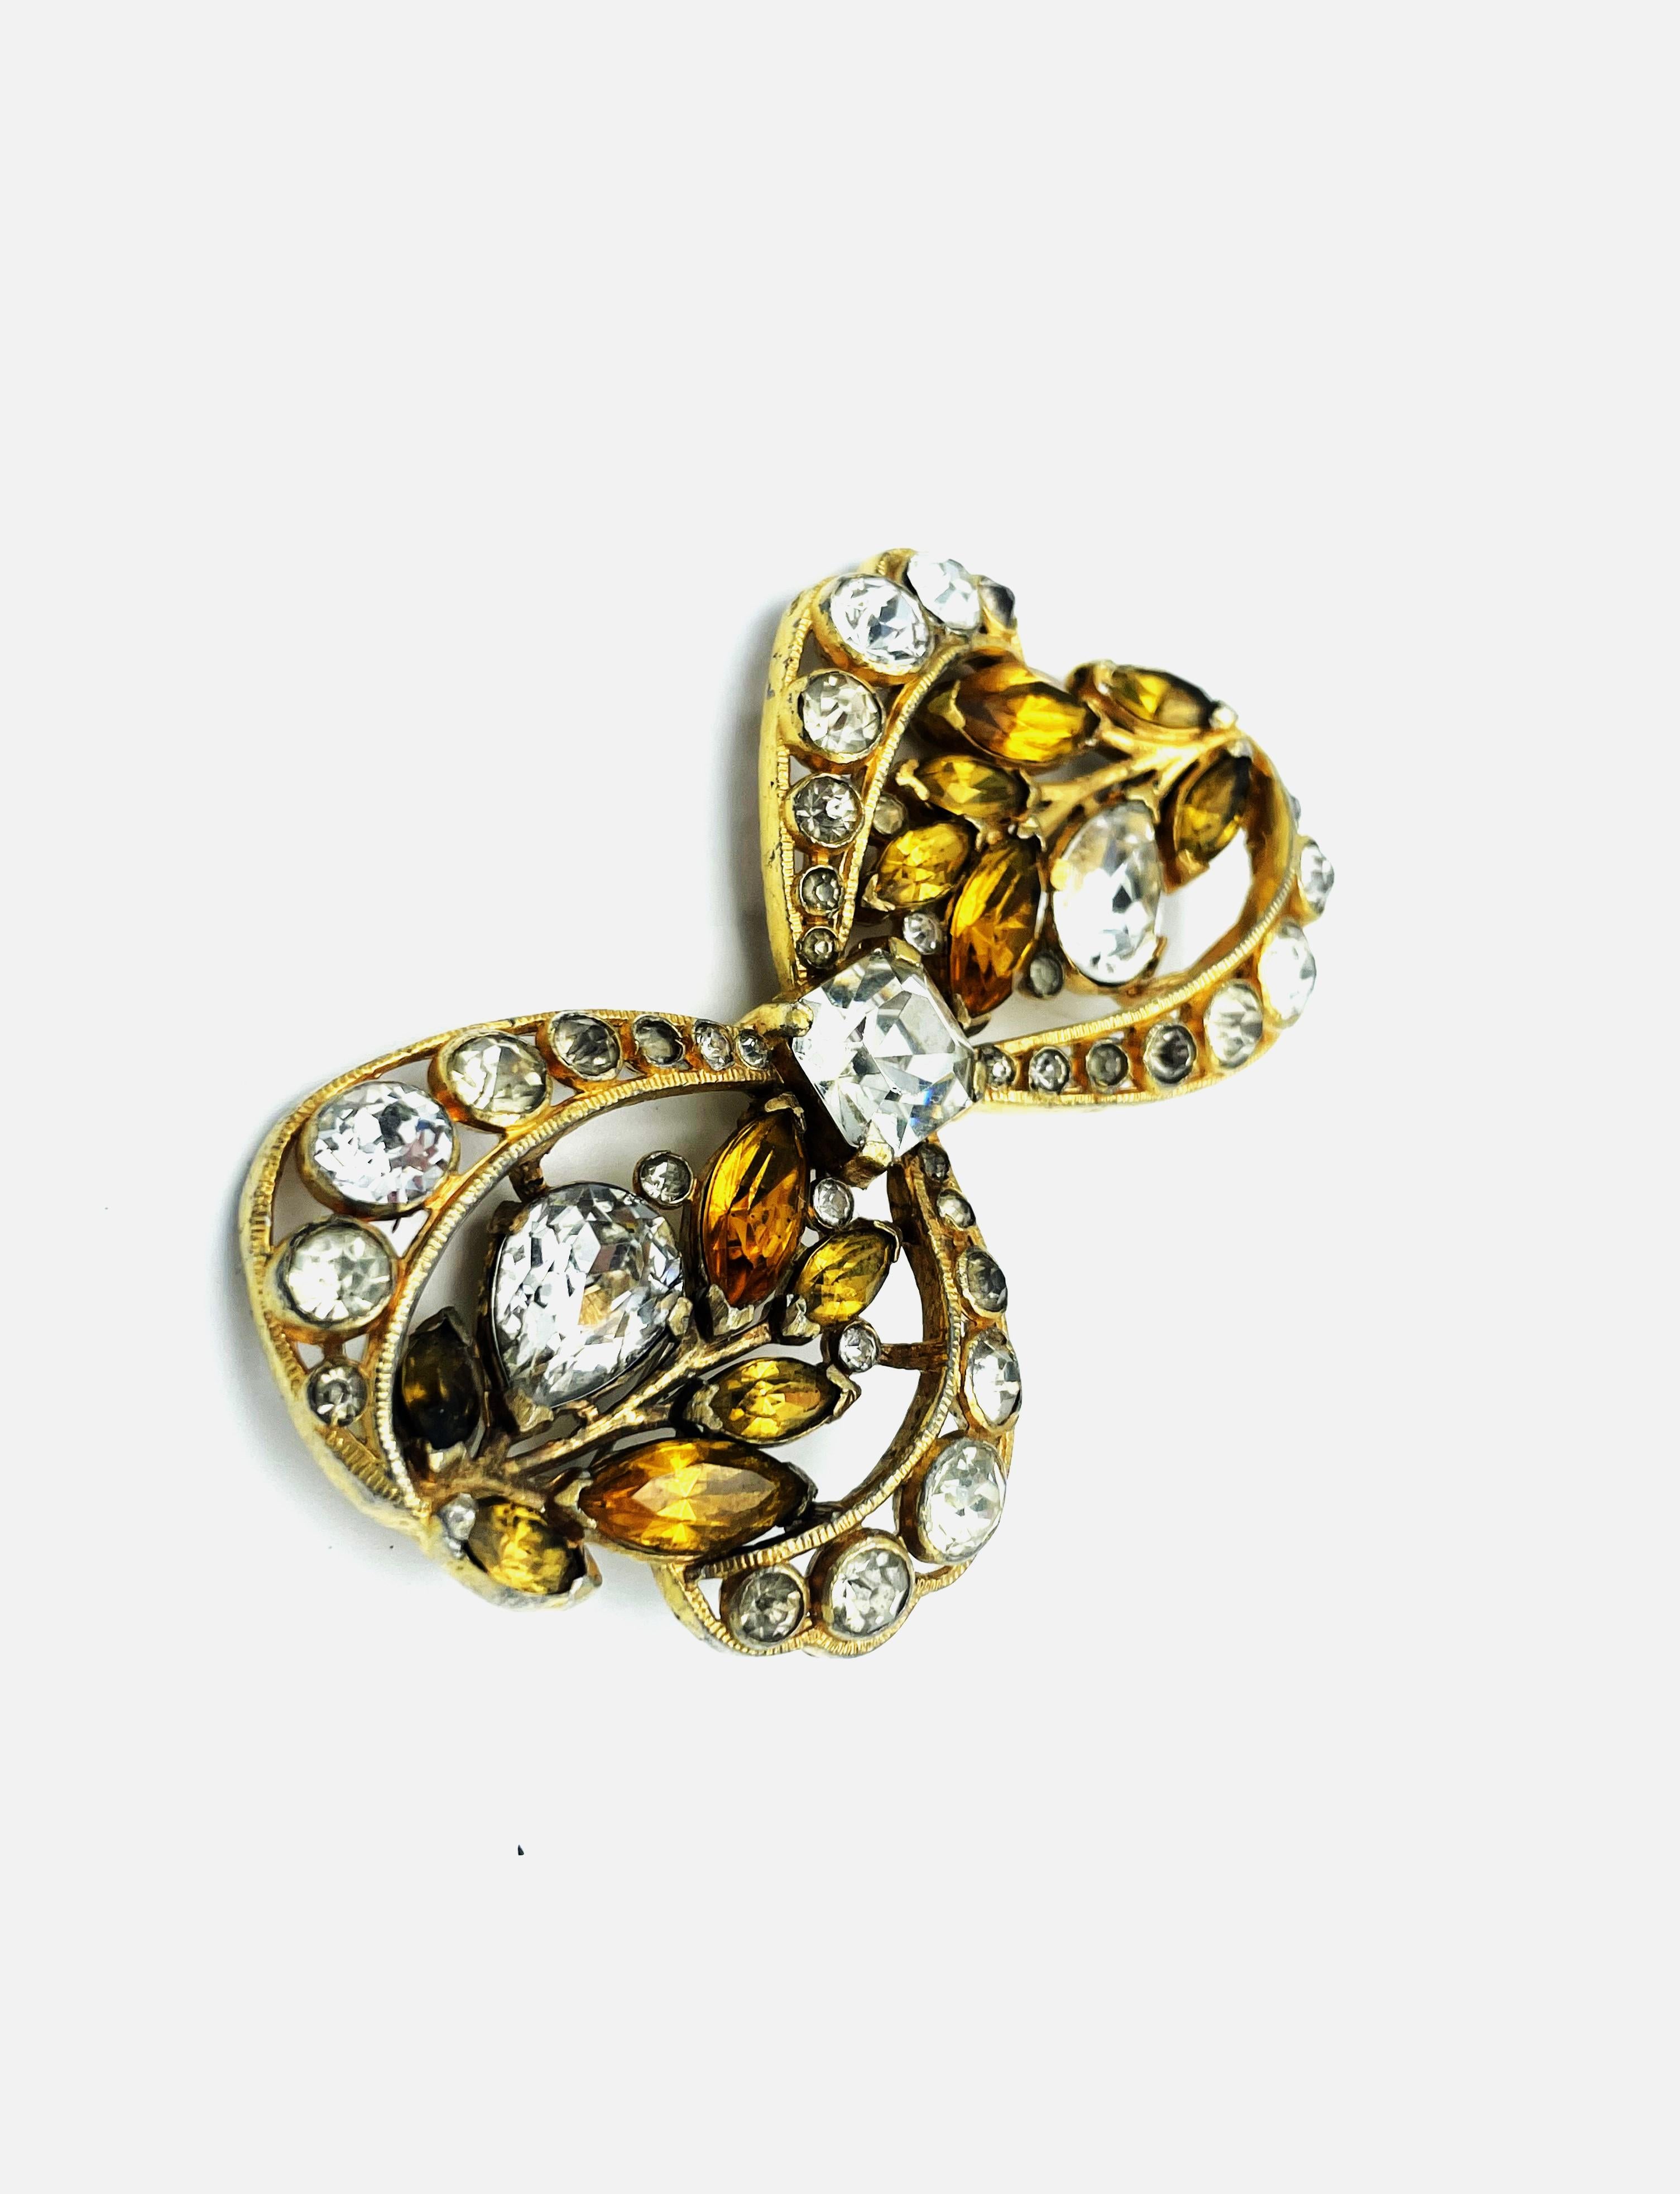 Women's EISENBERG ORIGINAL grinding brooch with larg faceted christals, gilded, USA 1940 For Sale